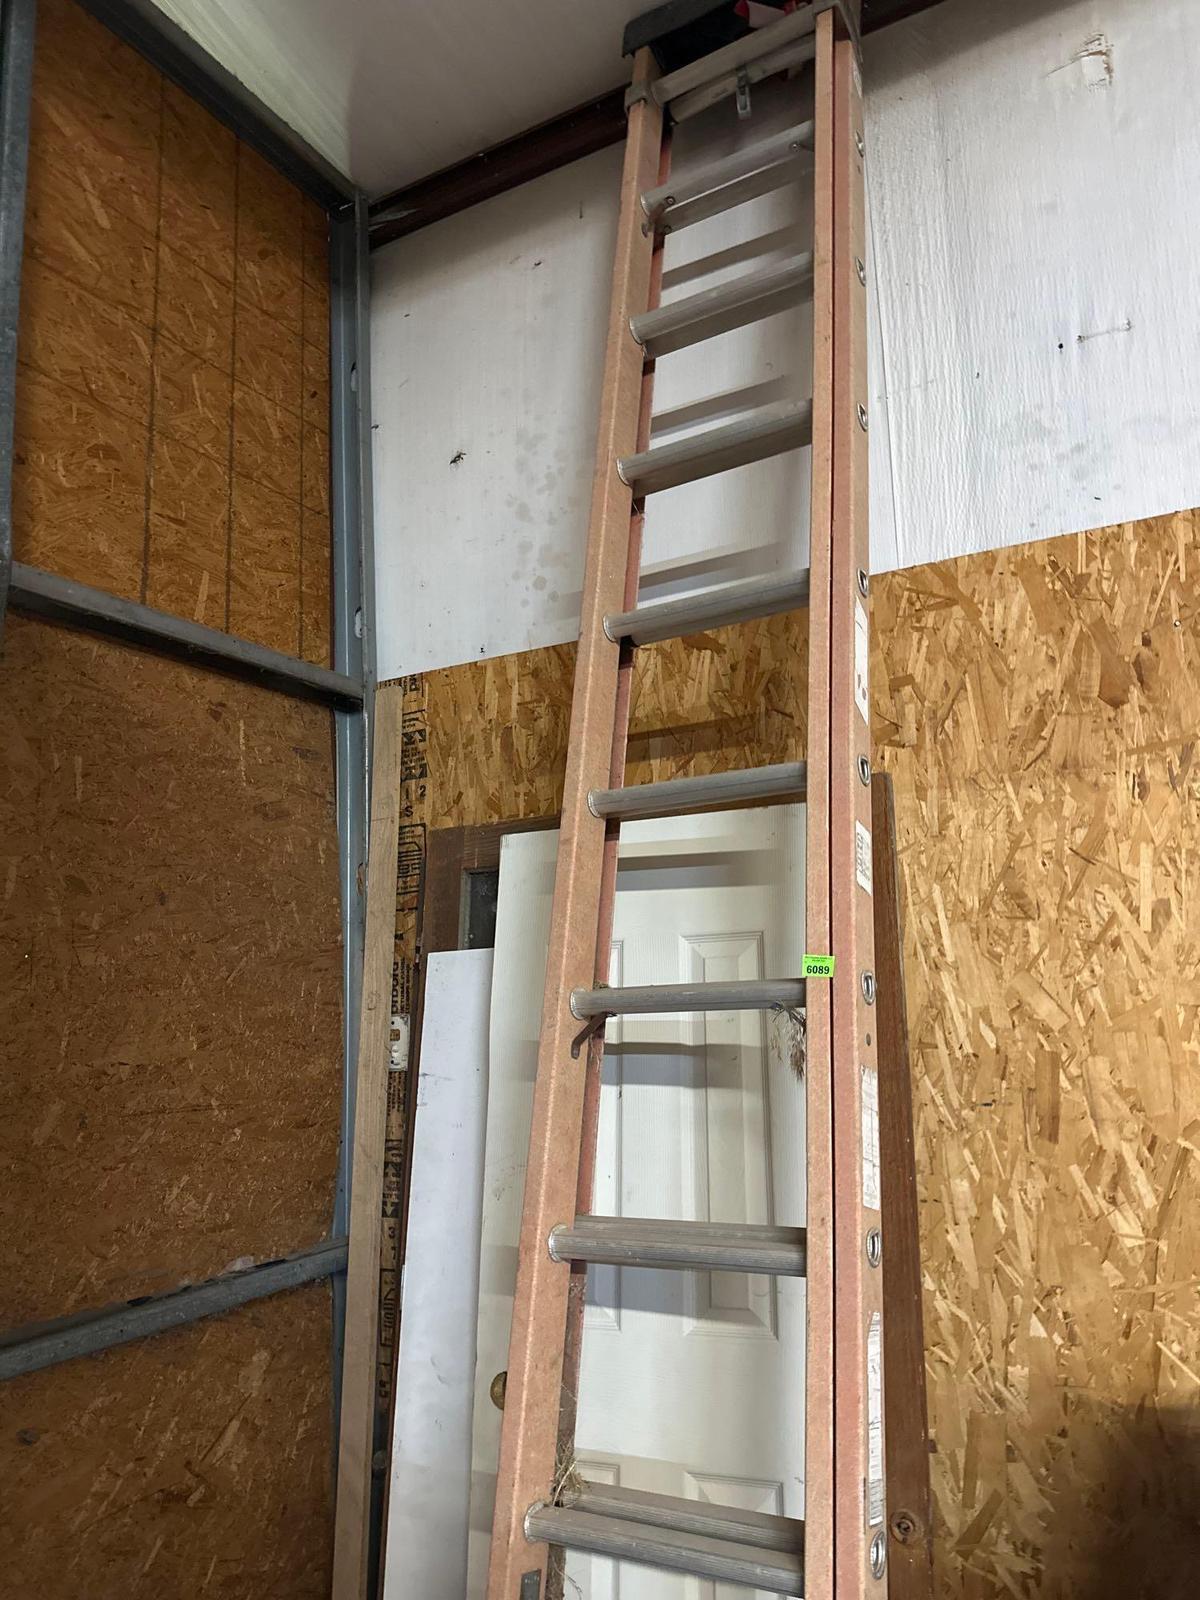 extension ladder and doors